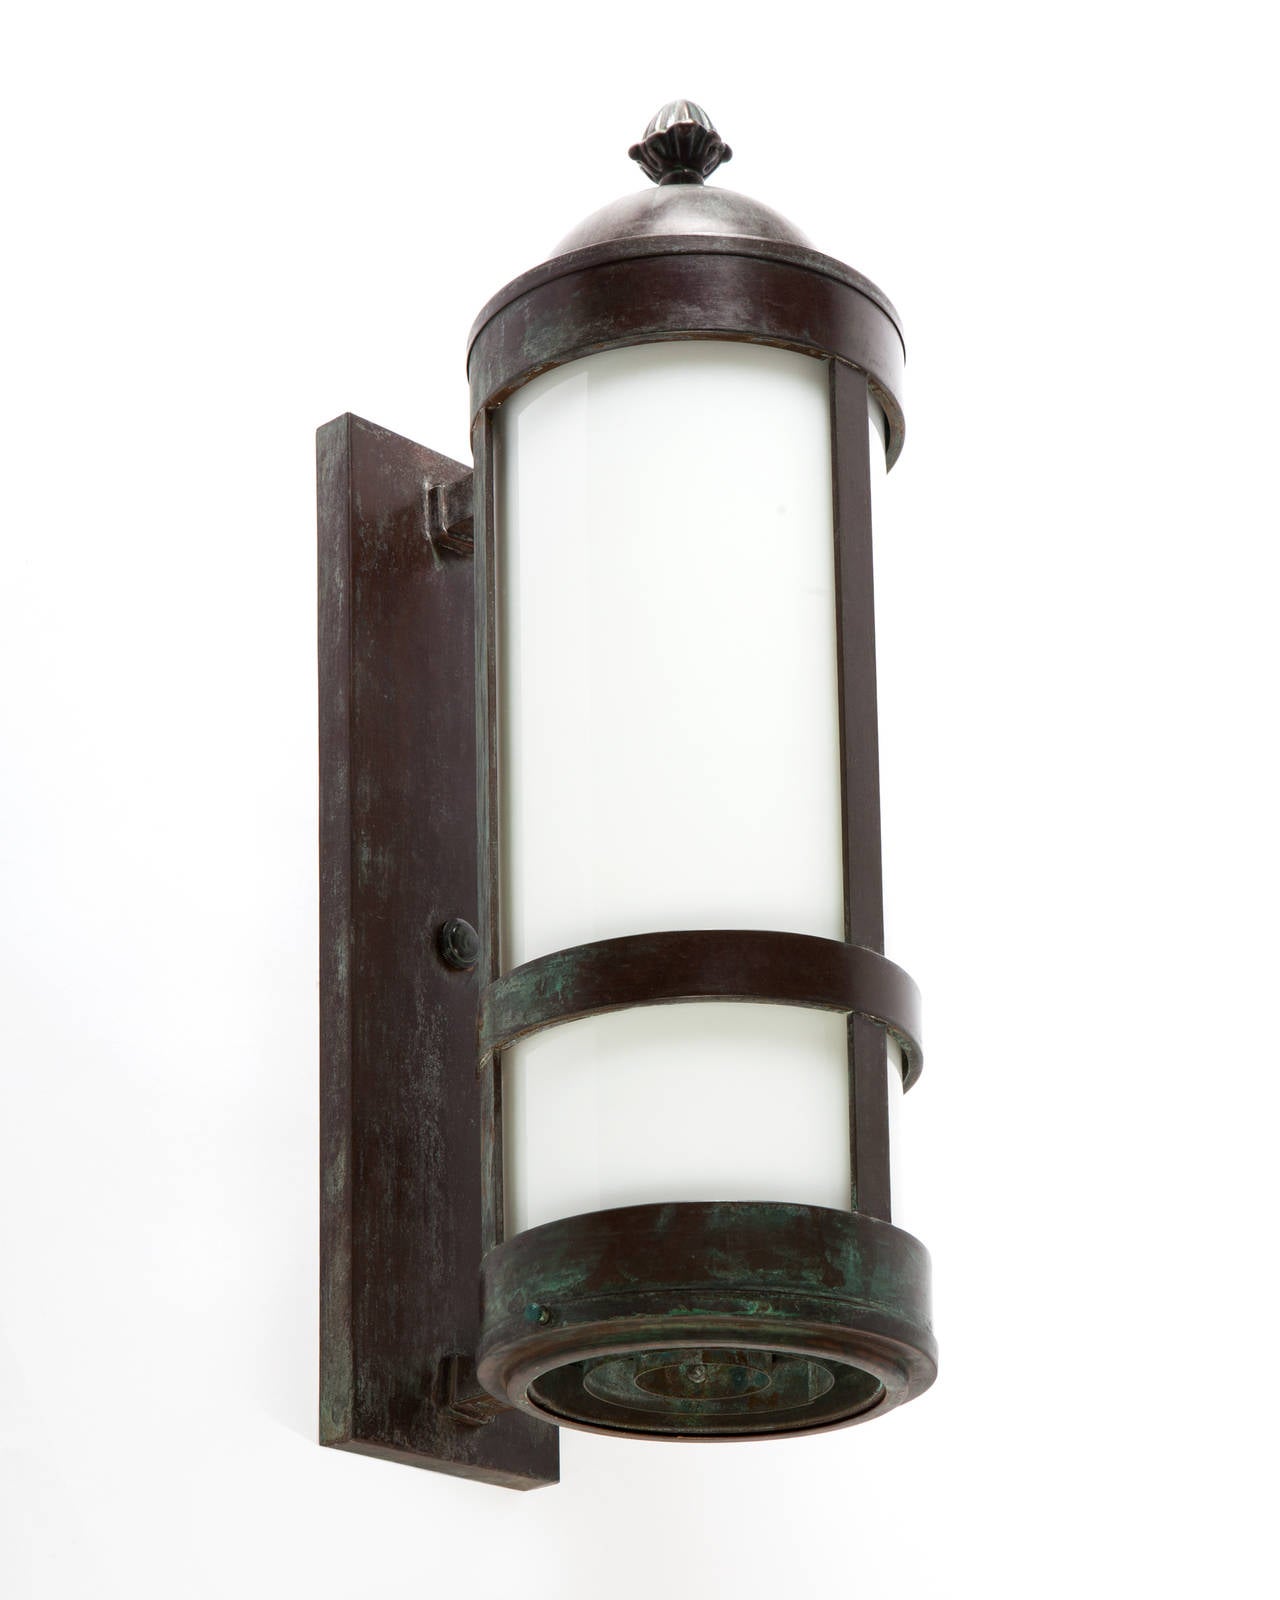 AEX0574
A pair of cylindrical wall lanterns with strapwork details in their original aged copper finish. Having white glass lenses.

Overall: 21-3/4